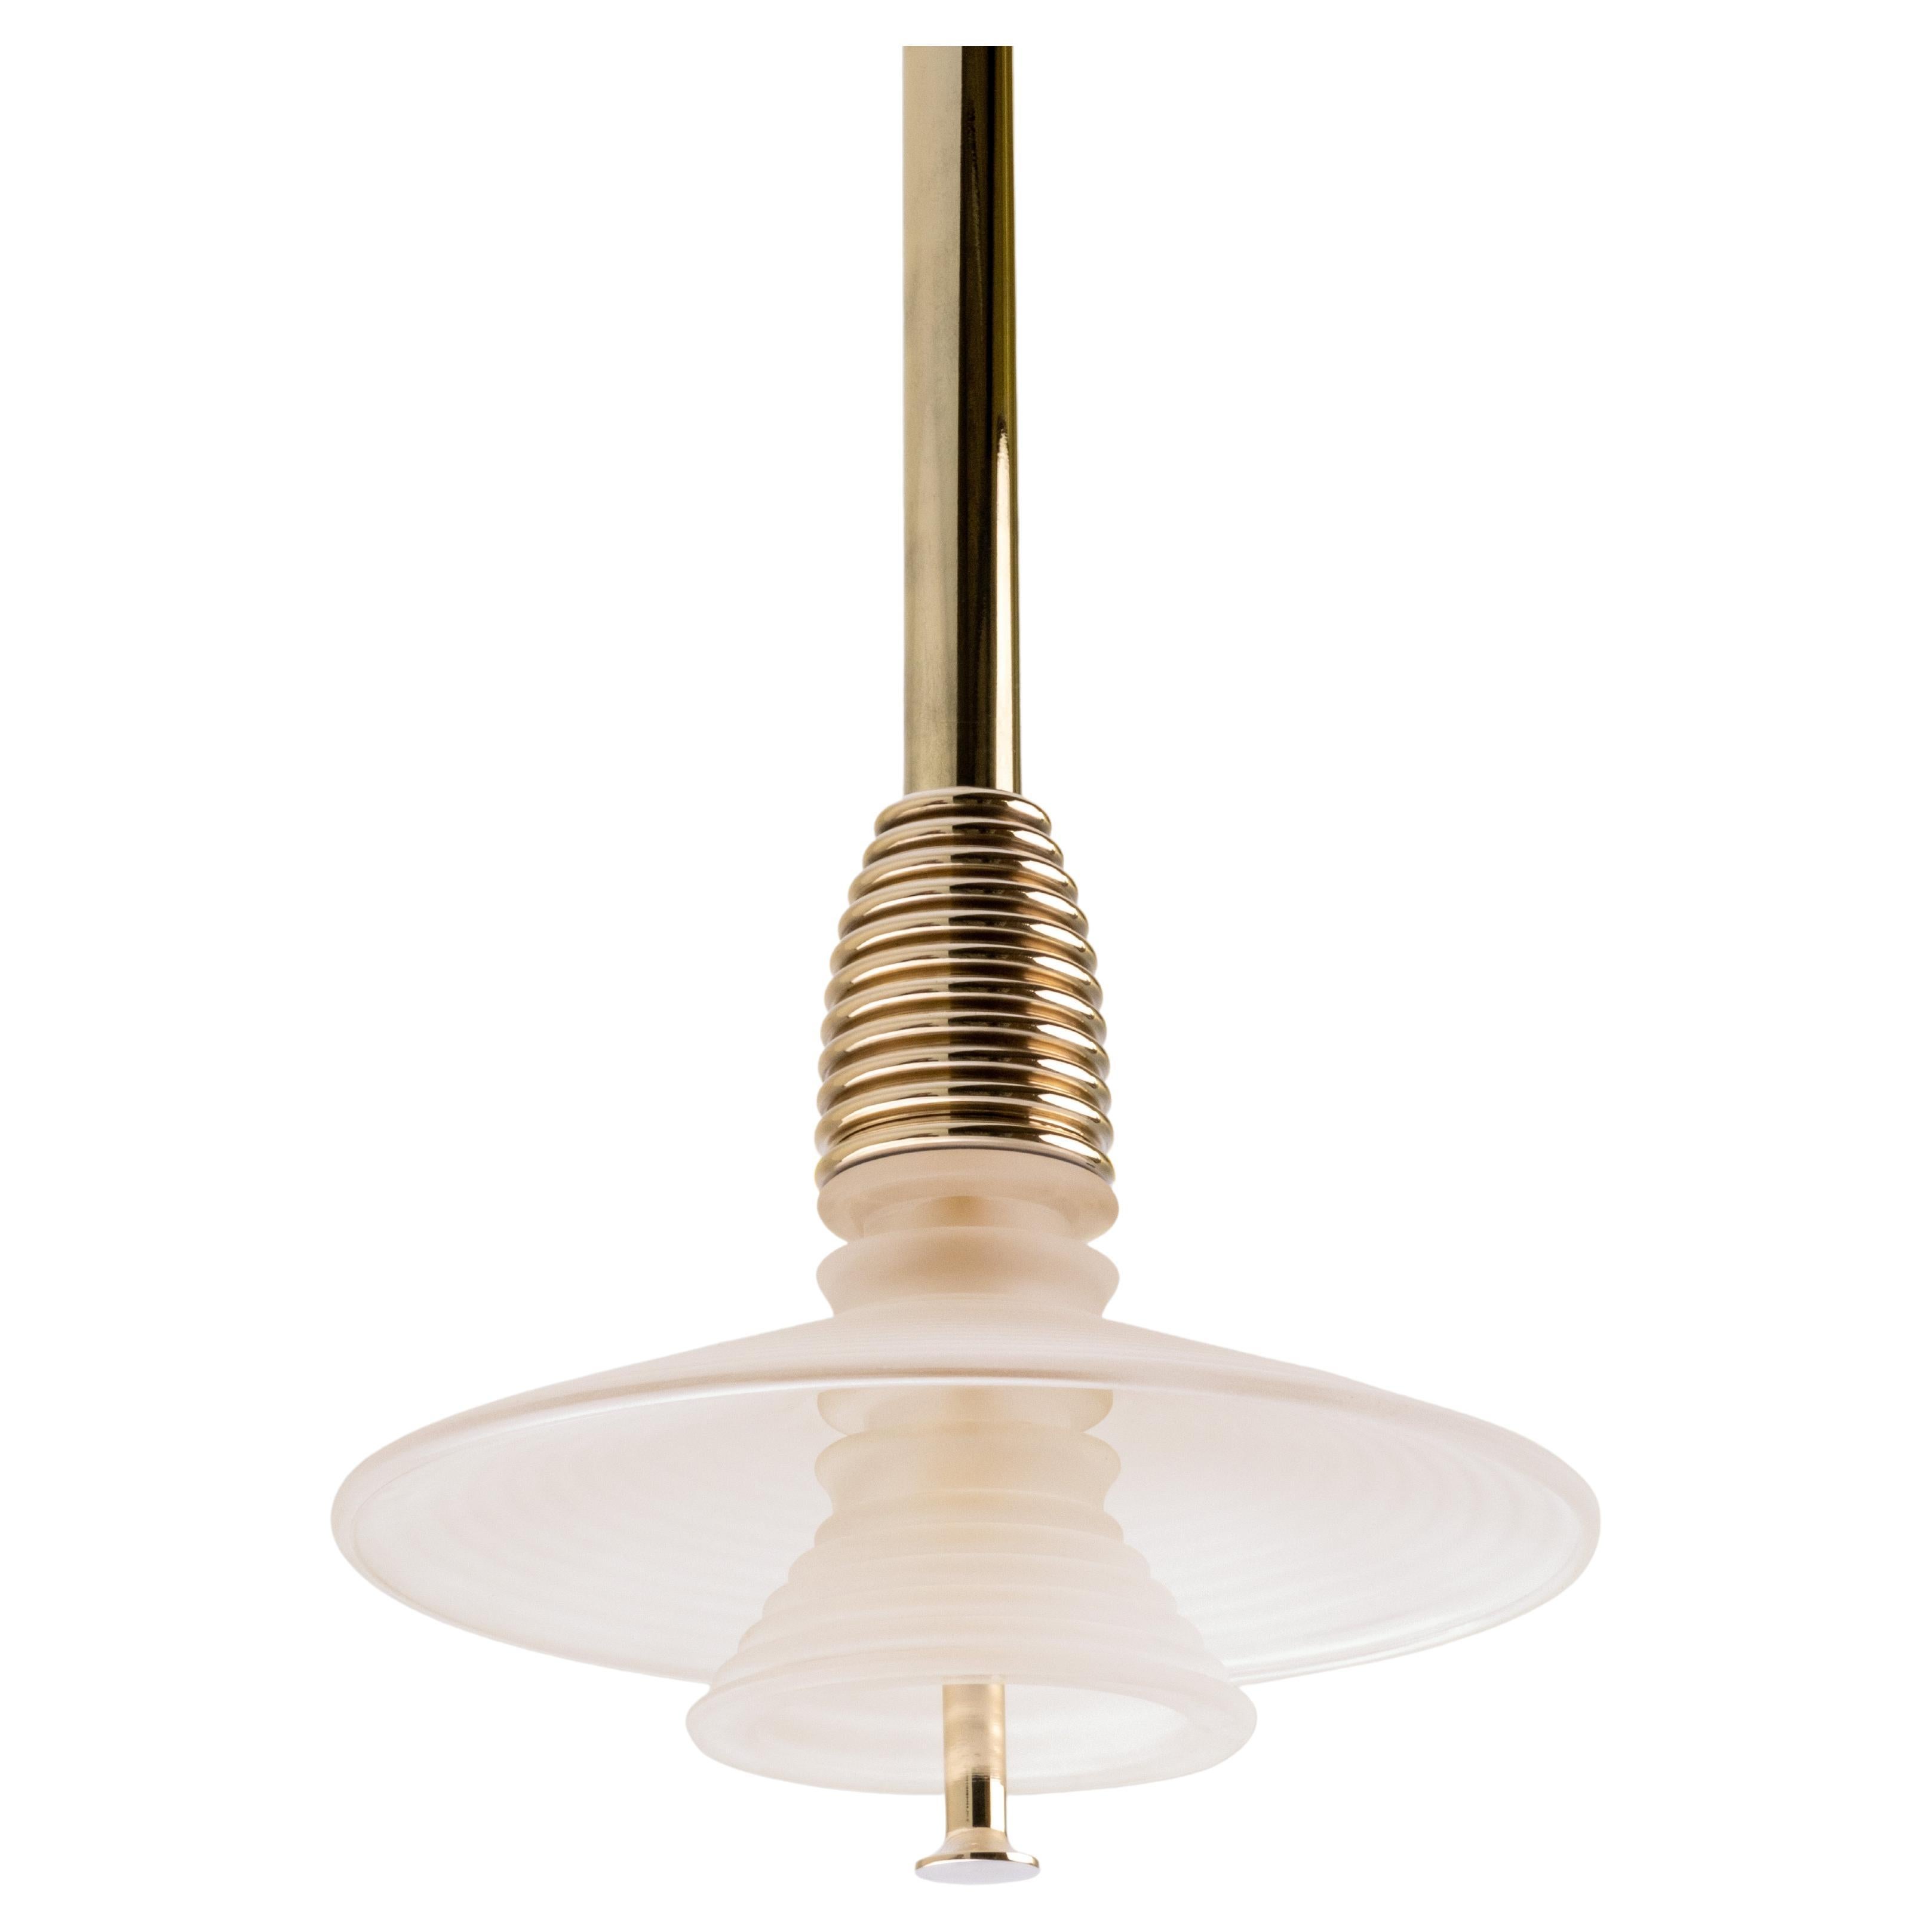 The Insulator 'AB' Pendant in polished brass and frosted glass by NOVOCASTRIAN